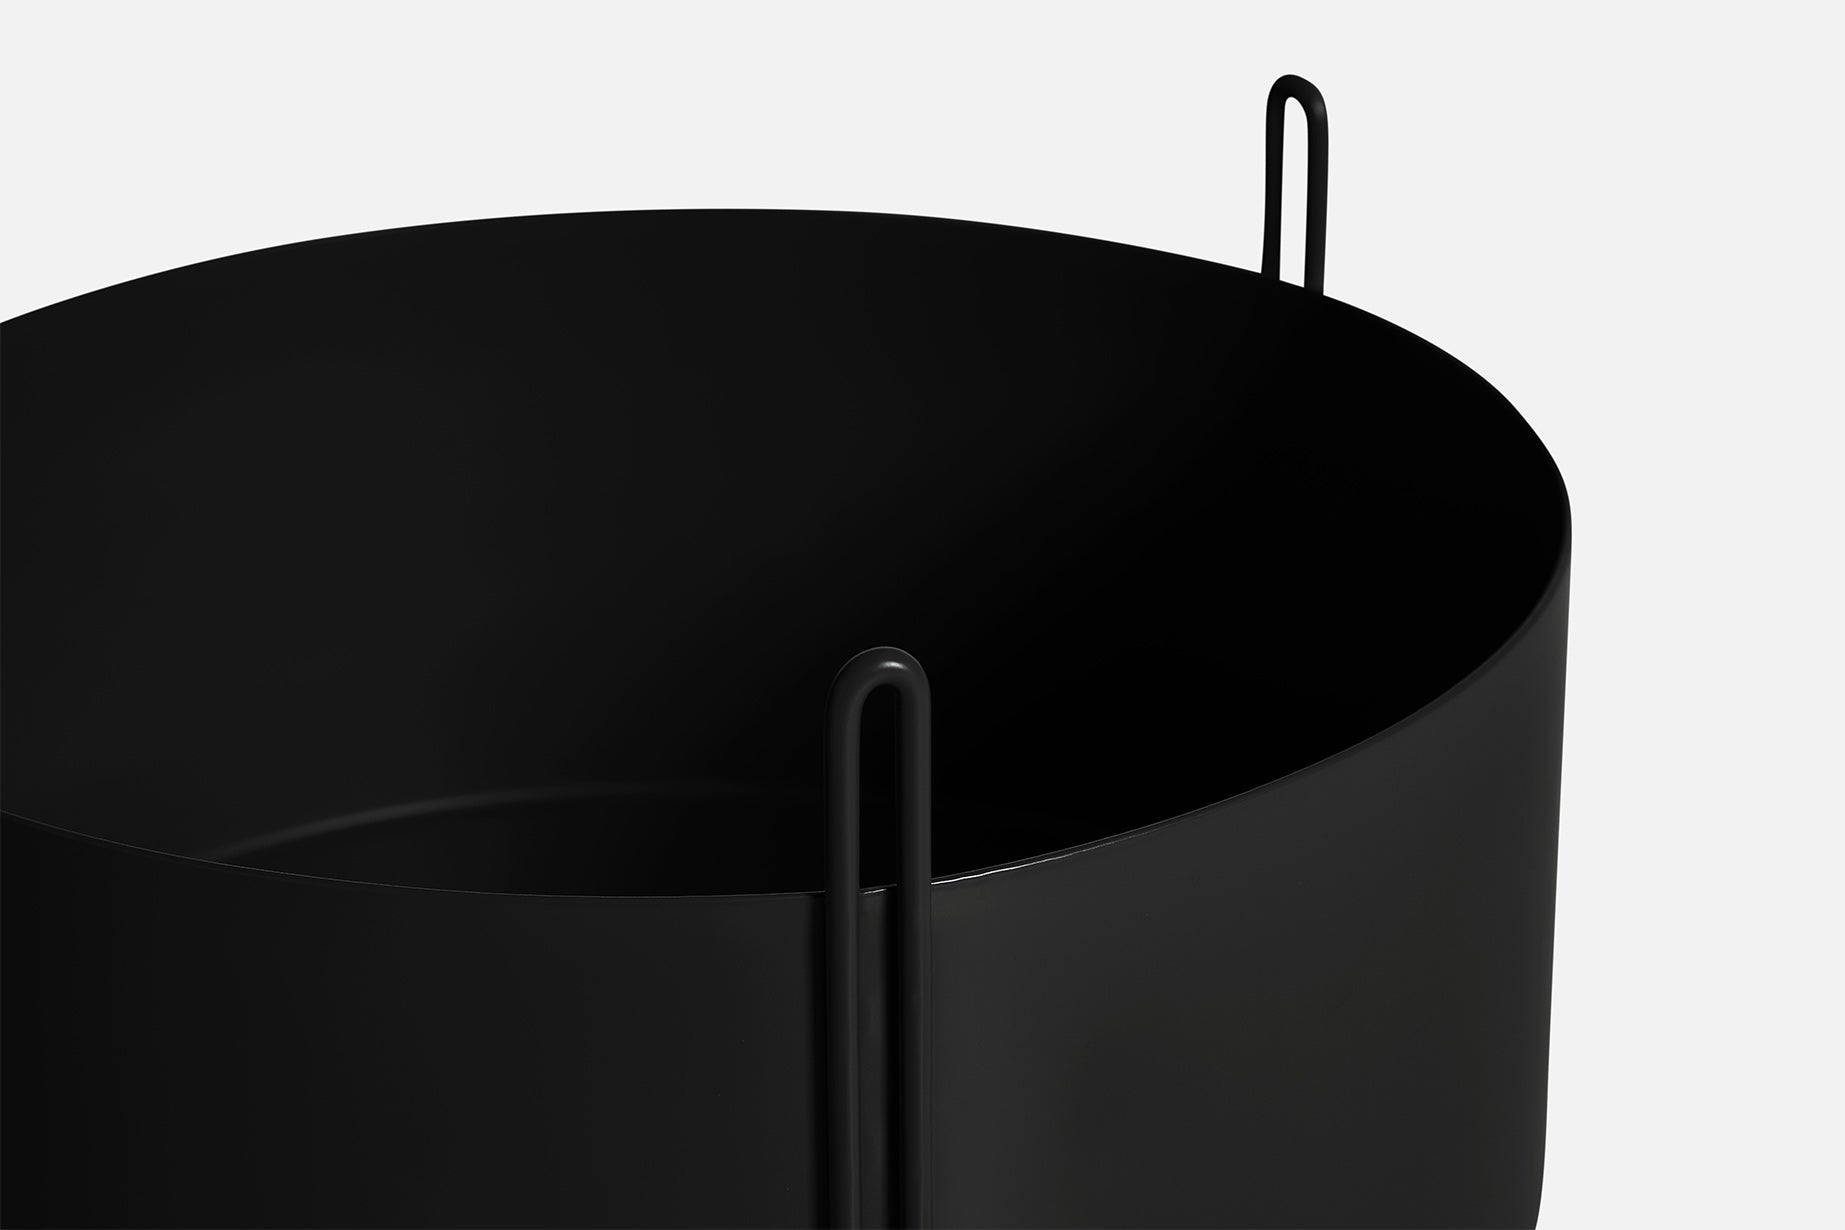 pidestall planter large black by woud at adorn.house